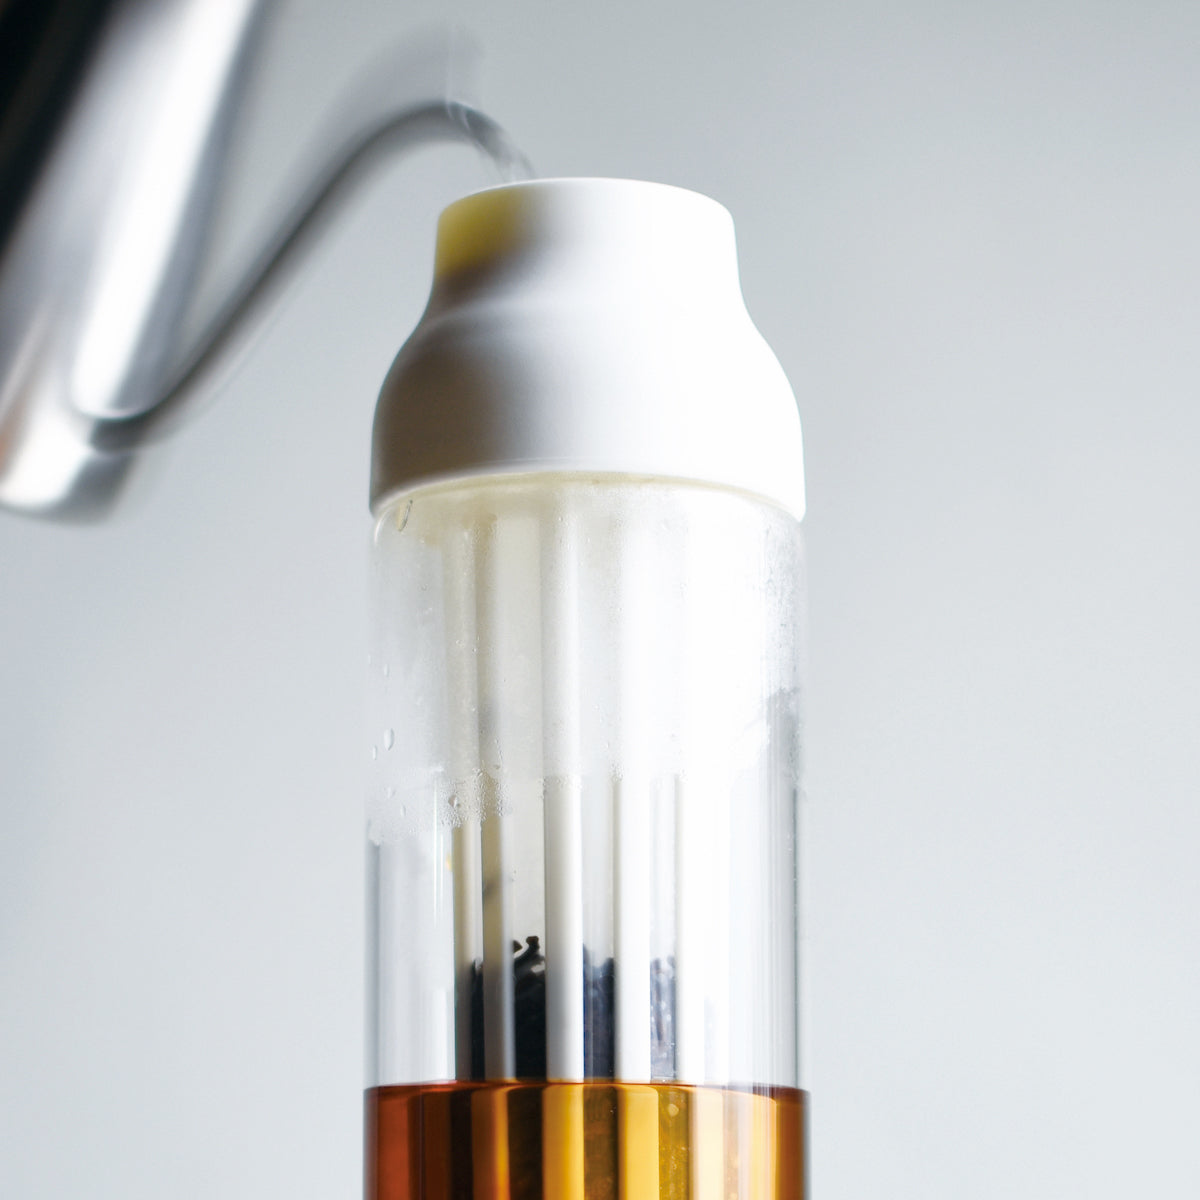 Kinto capsule cold brew carafe | THE COFFEE GOODS